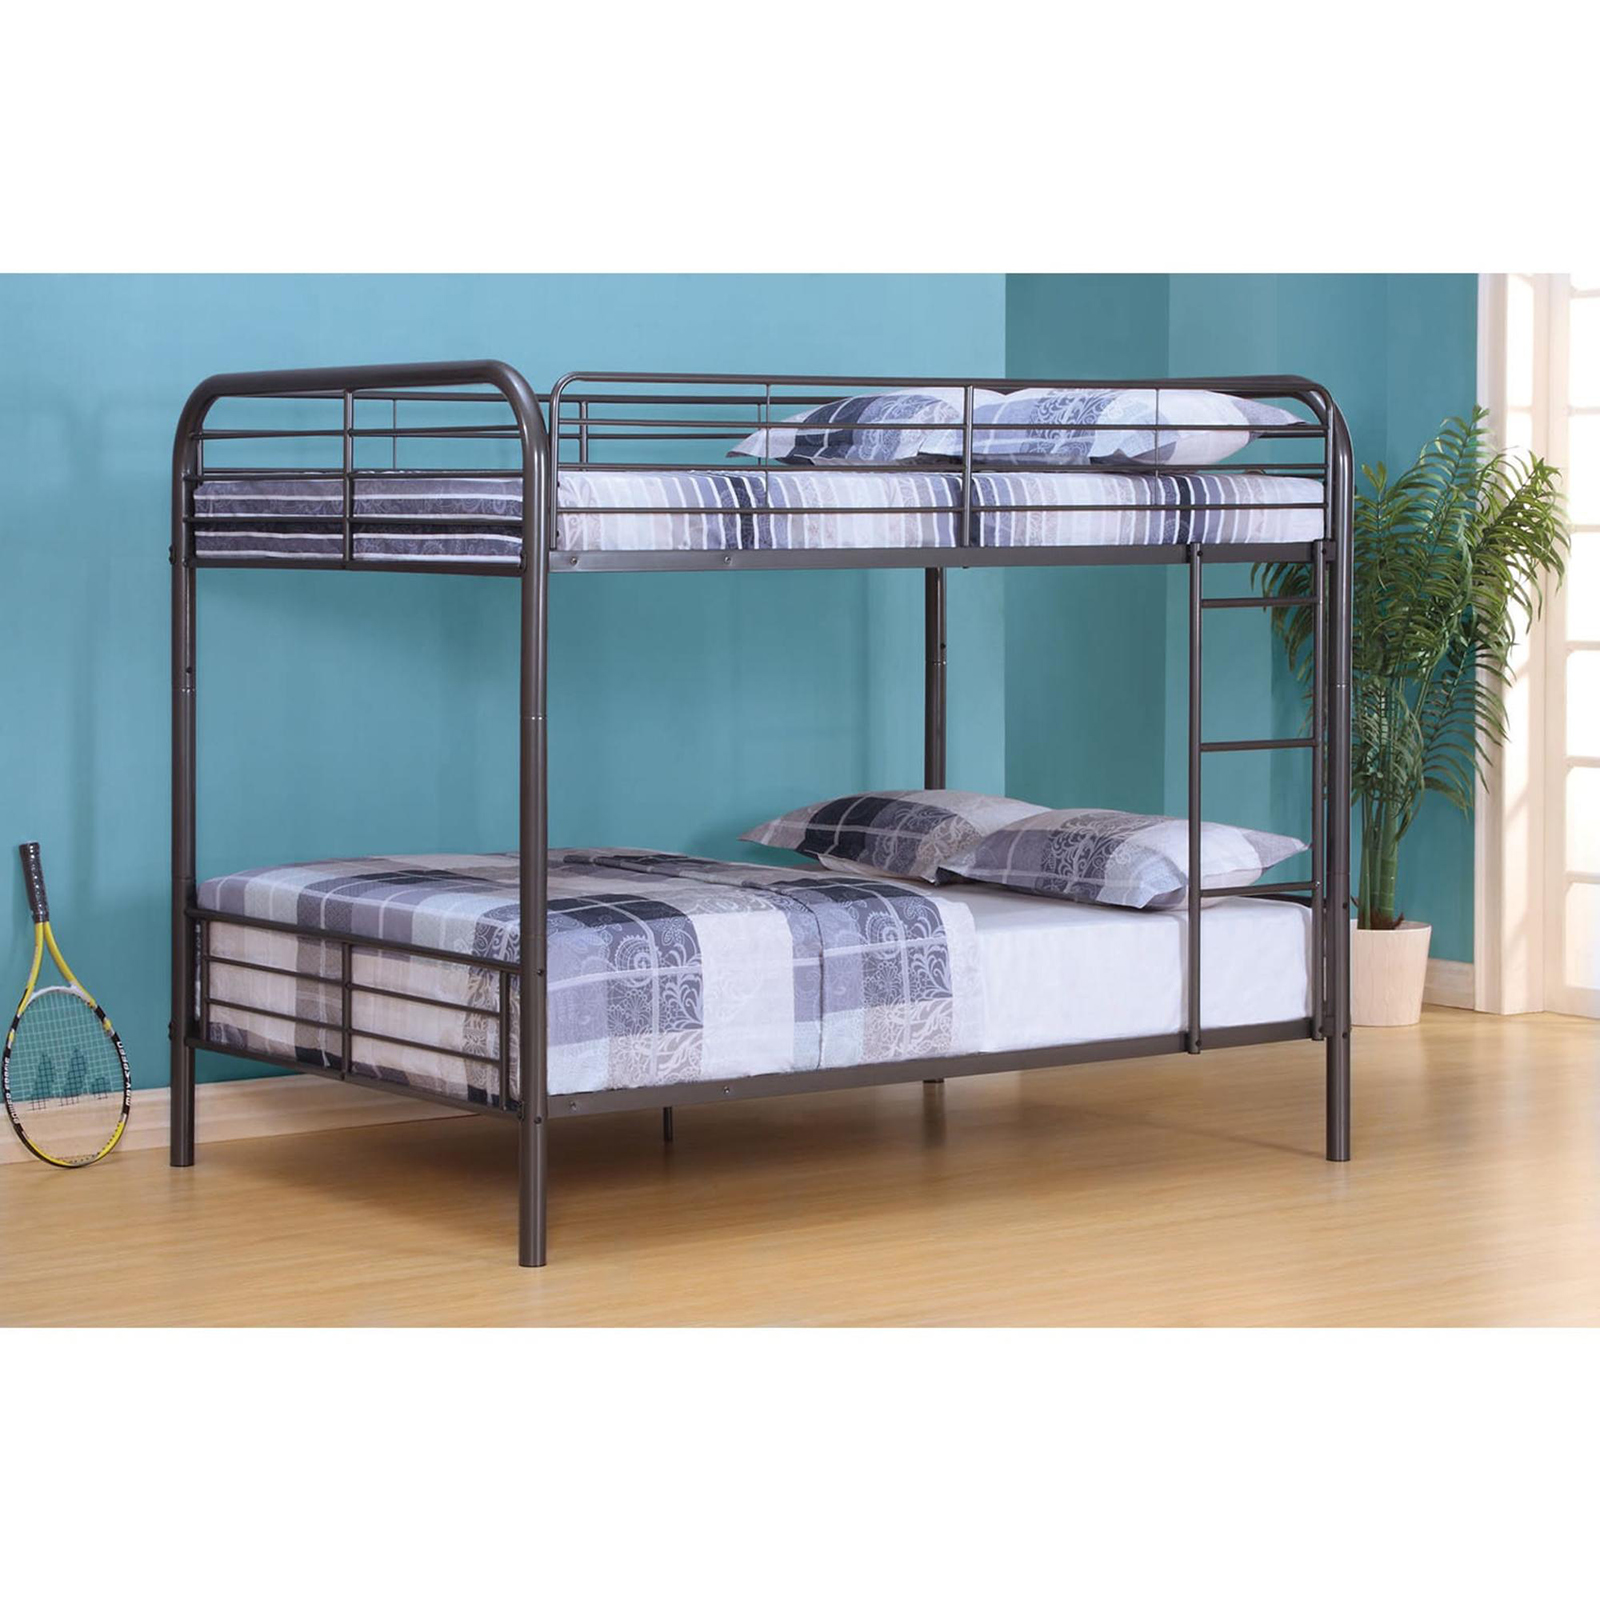 Acme Furniture Full Bristol Convertible, Sears Bunk Beds Full Over Bed